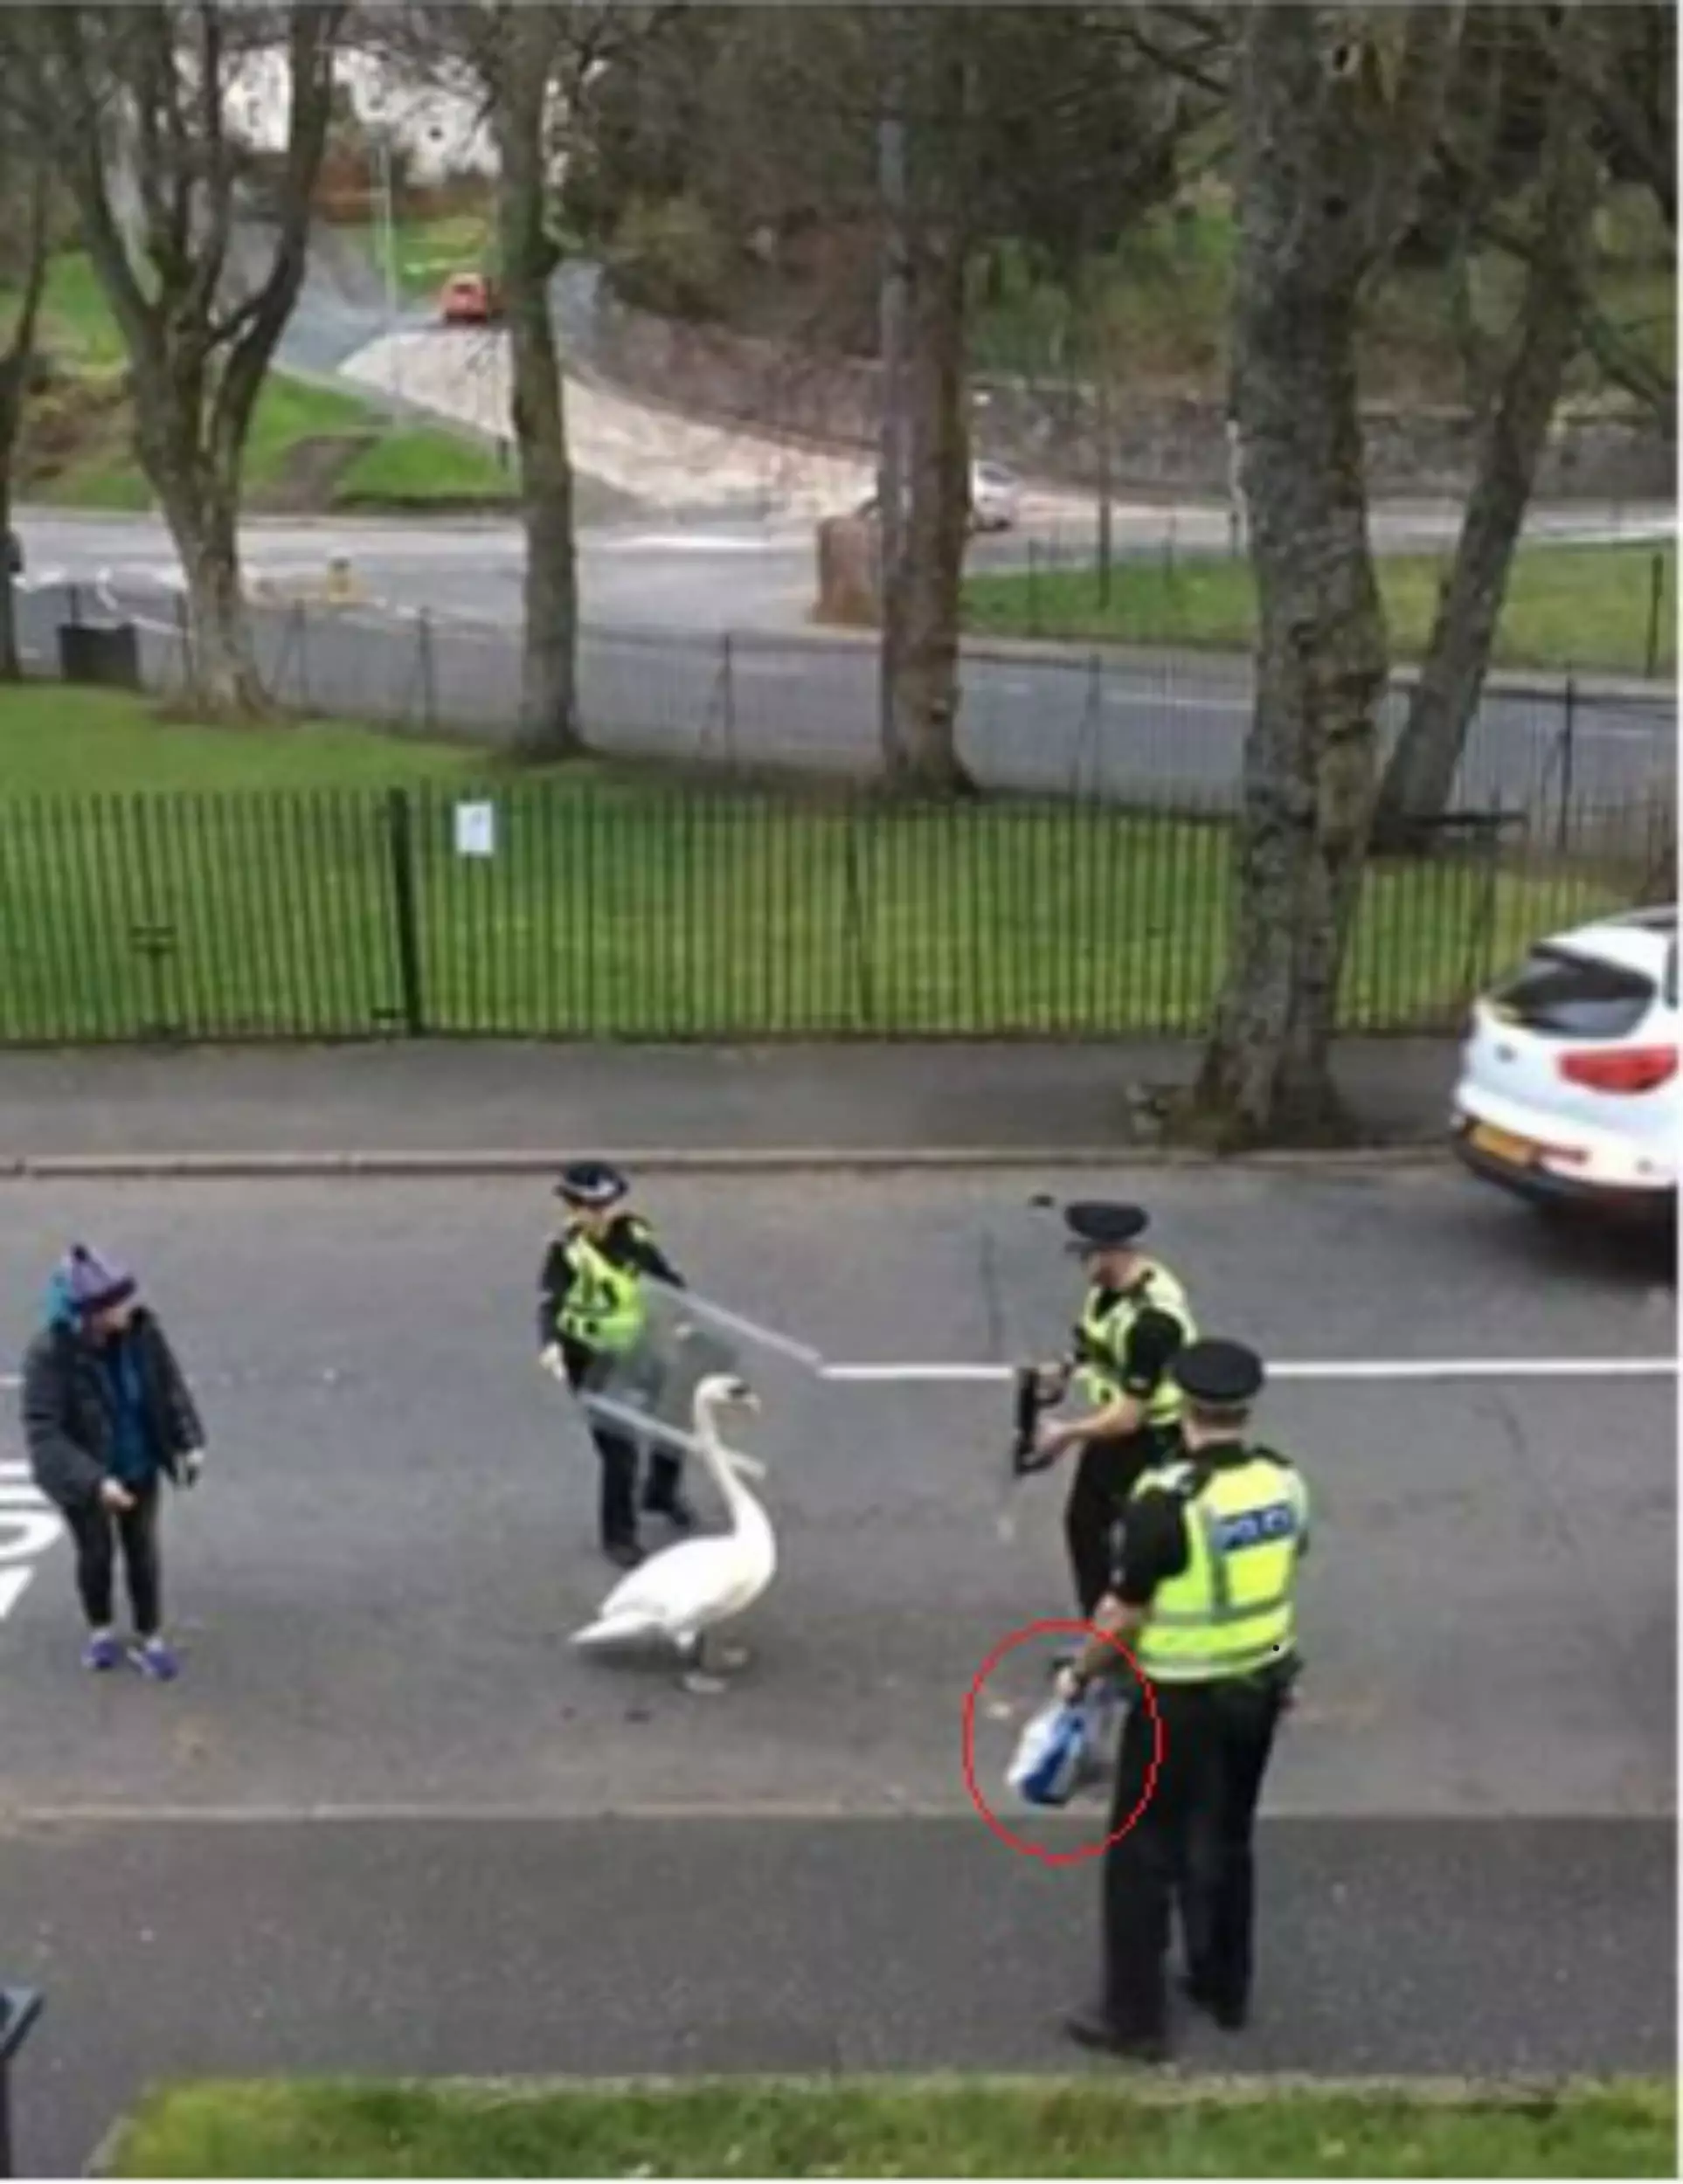 One of the police officer held a loaf of bread to coax the swan back to its place of residence.